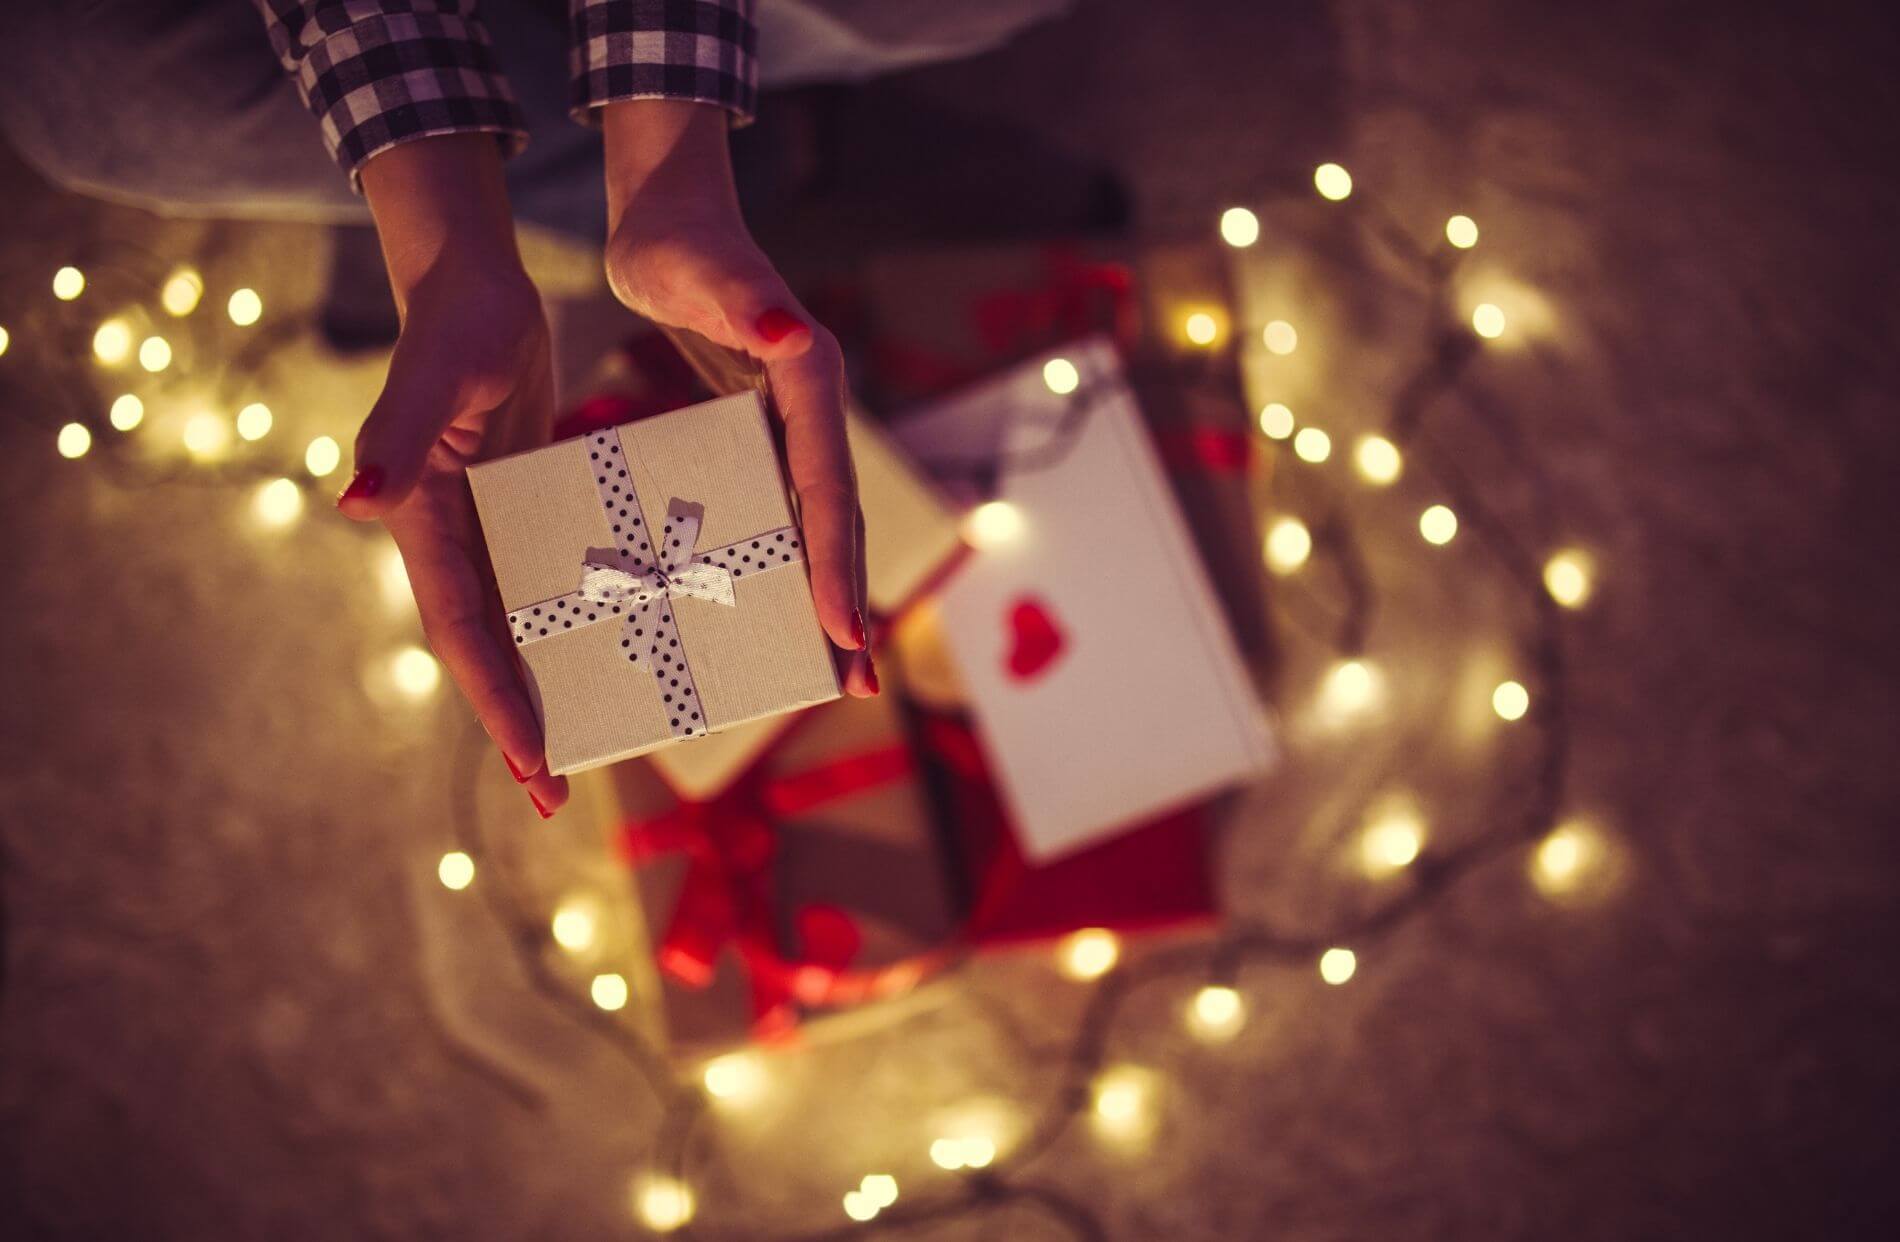 Twinkling lights in heart shape around gifts and someone holding out a gift.